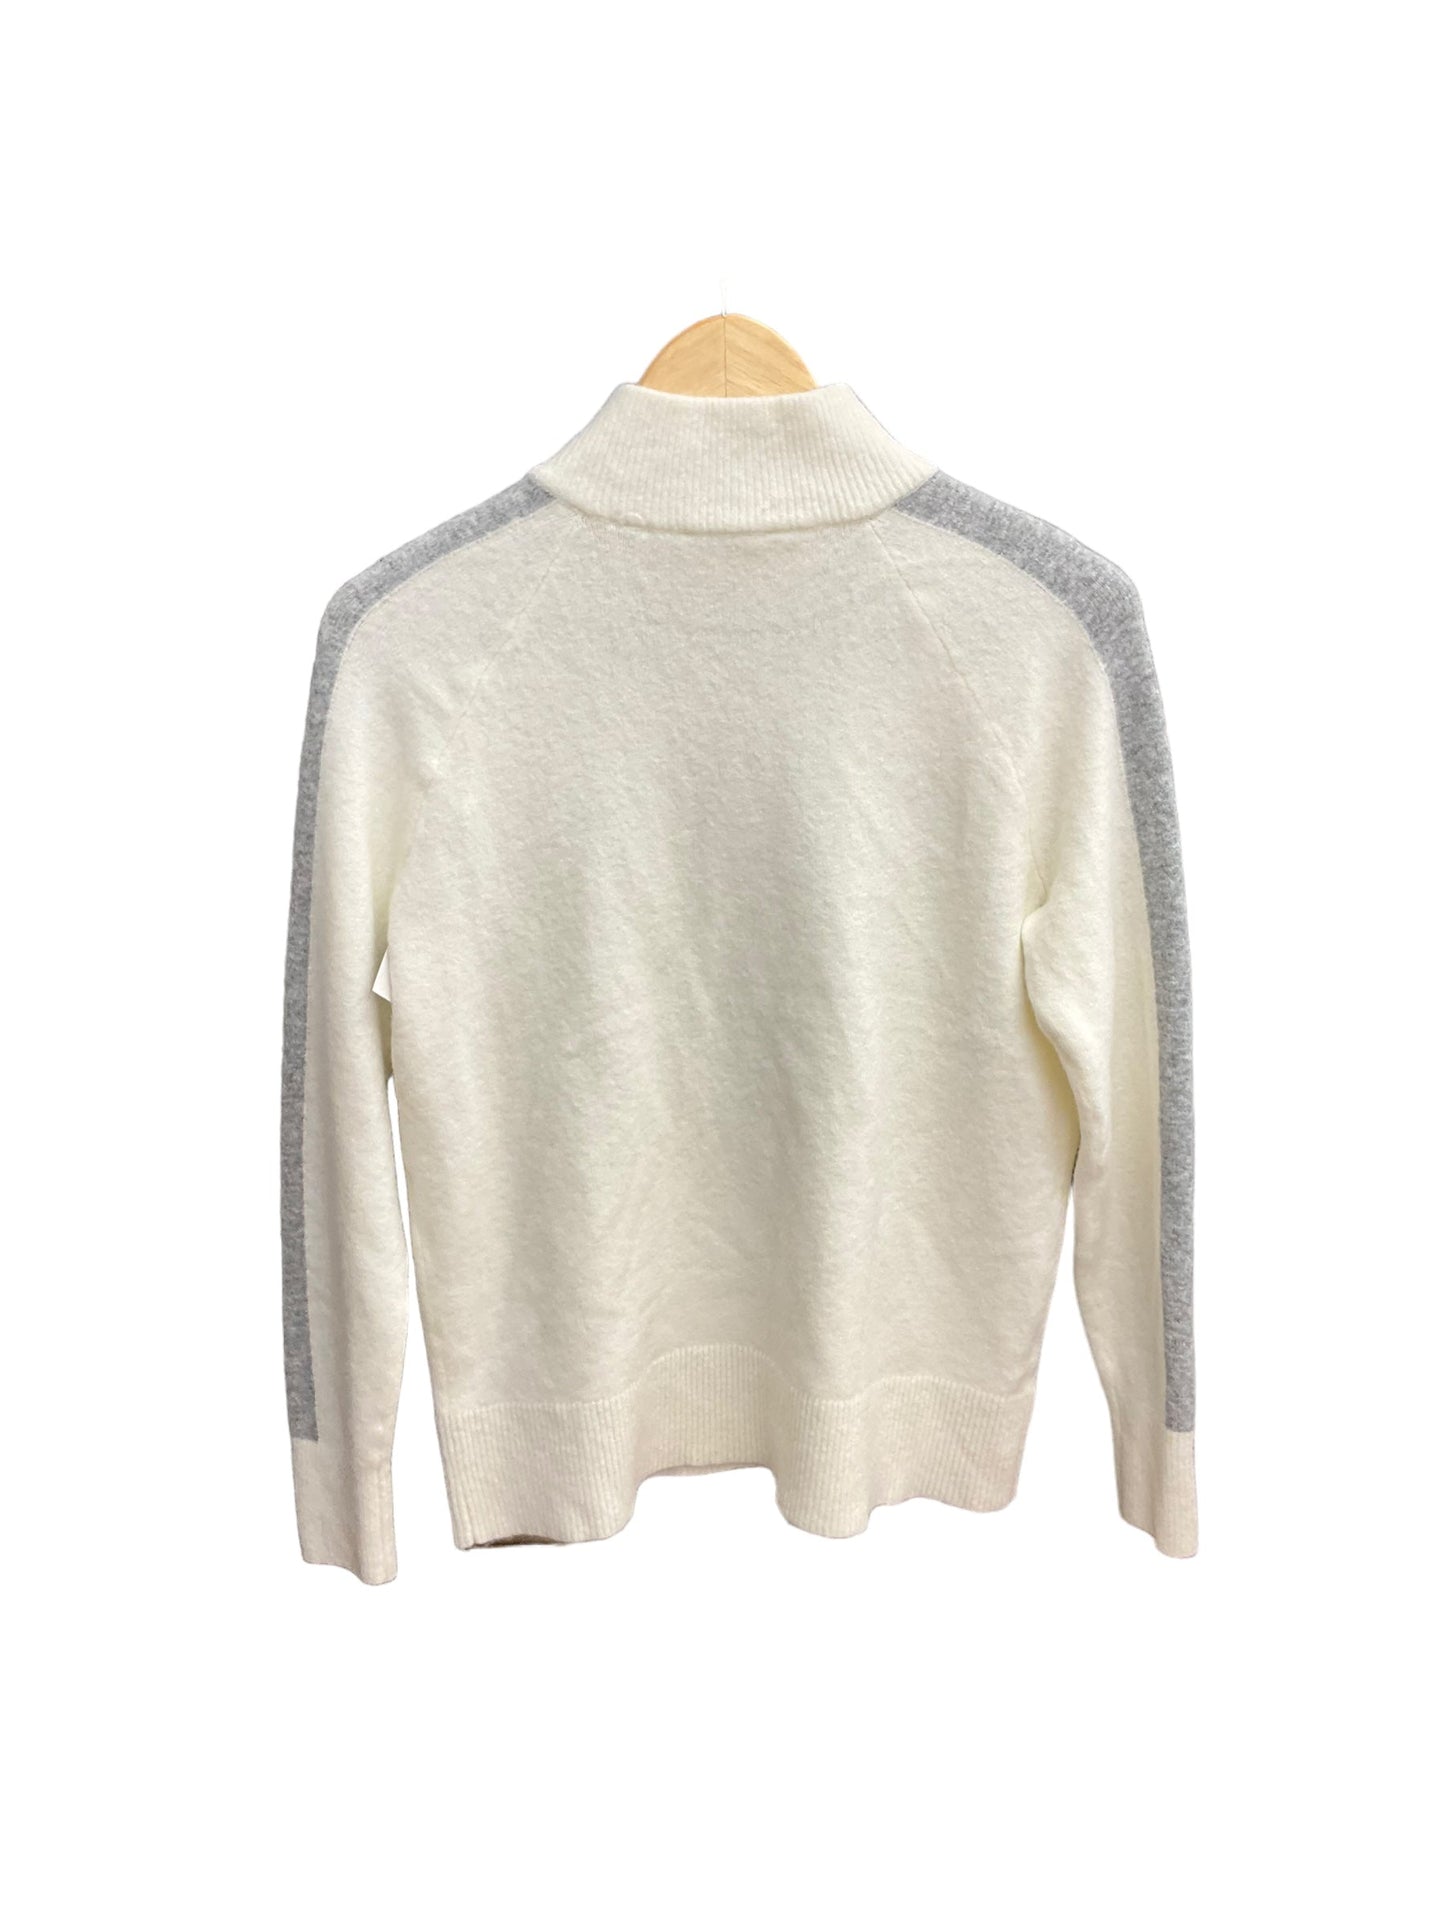 Cream Sweater Lou And Grey, Size Xs